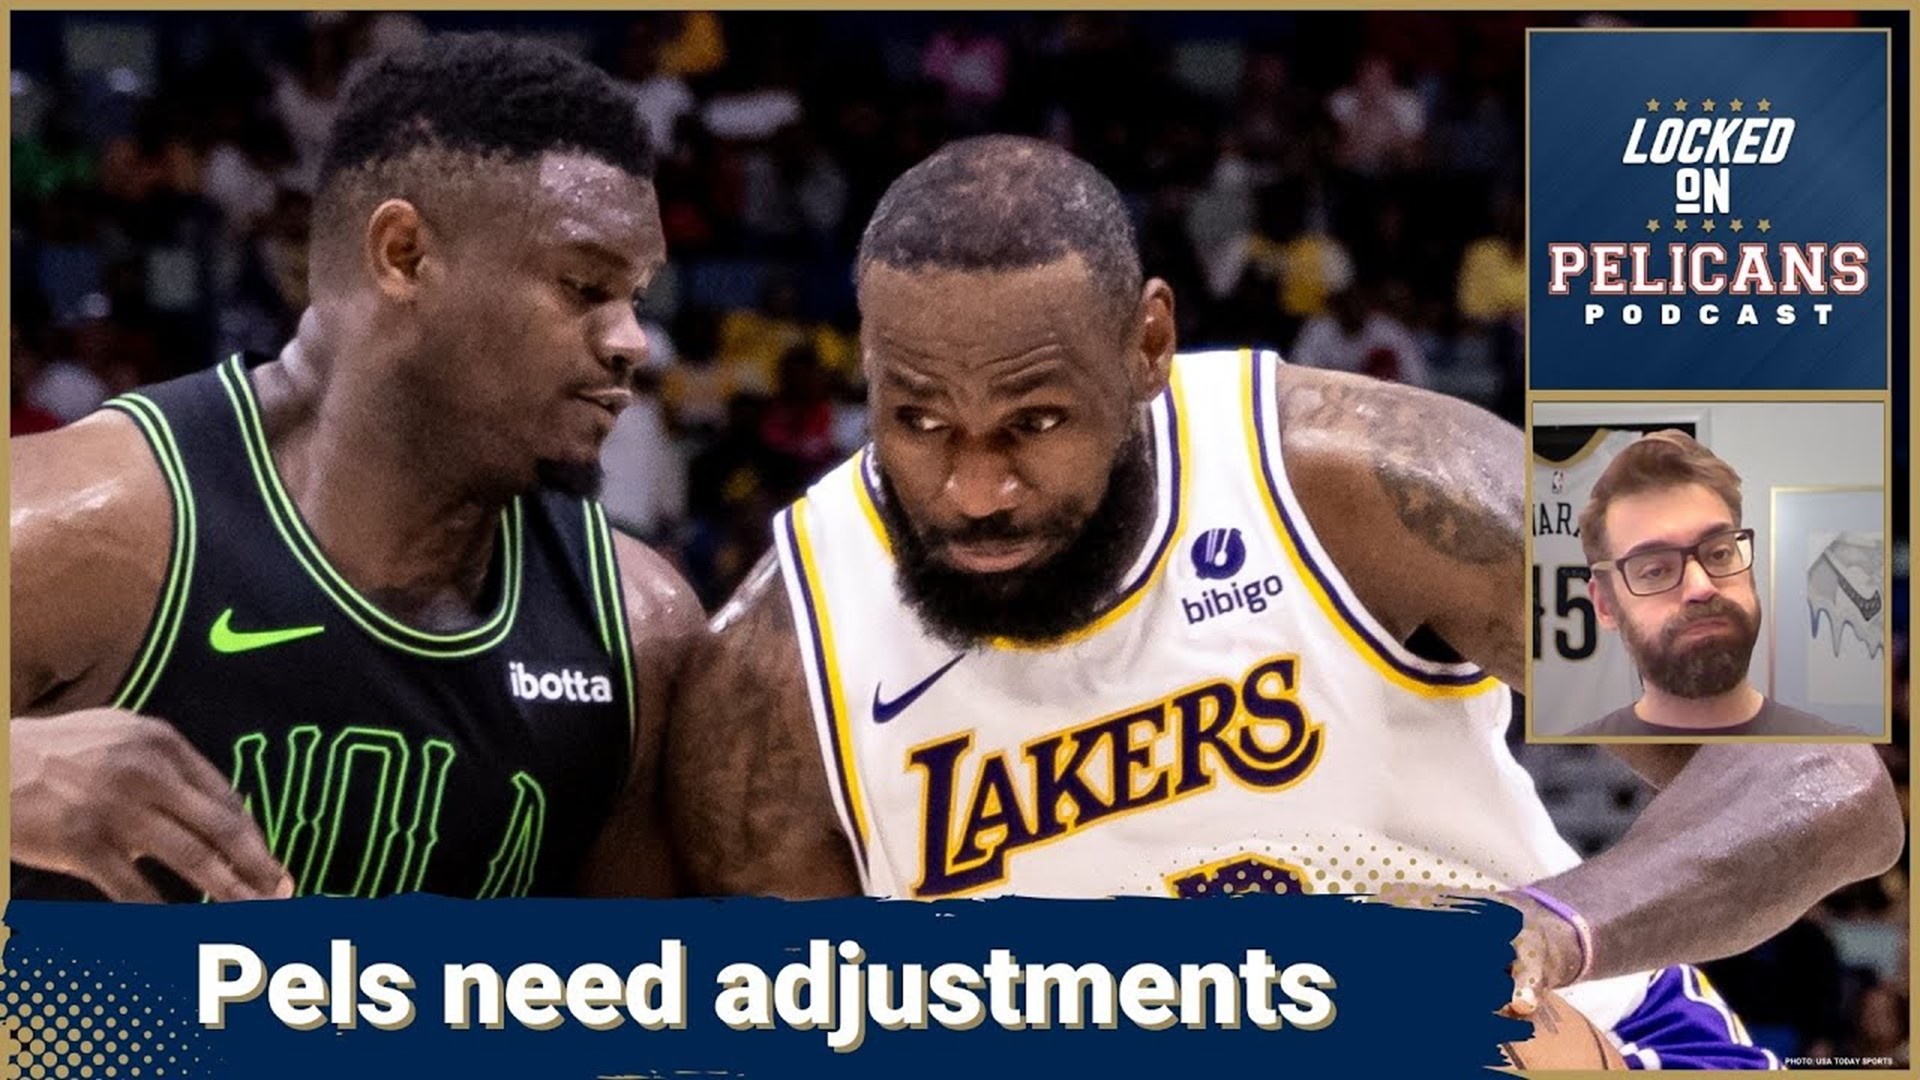 It's a disappointing end to the regular season for Zion Williamson and the New Orleans Pelicans as they lose to the Los Angeles Lakers and LeBron James.